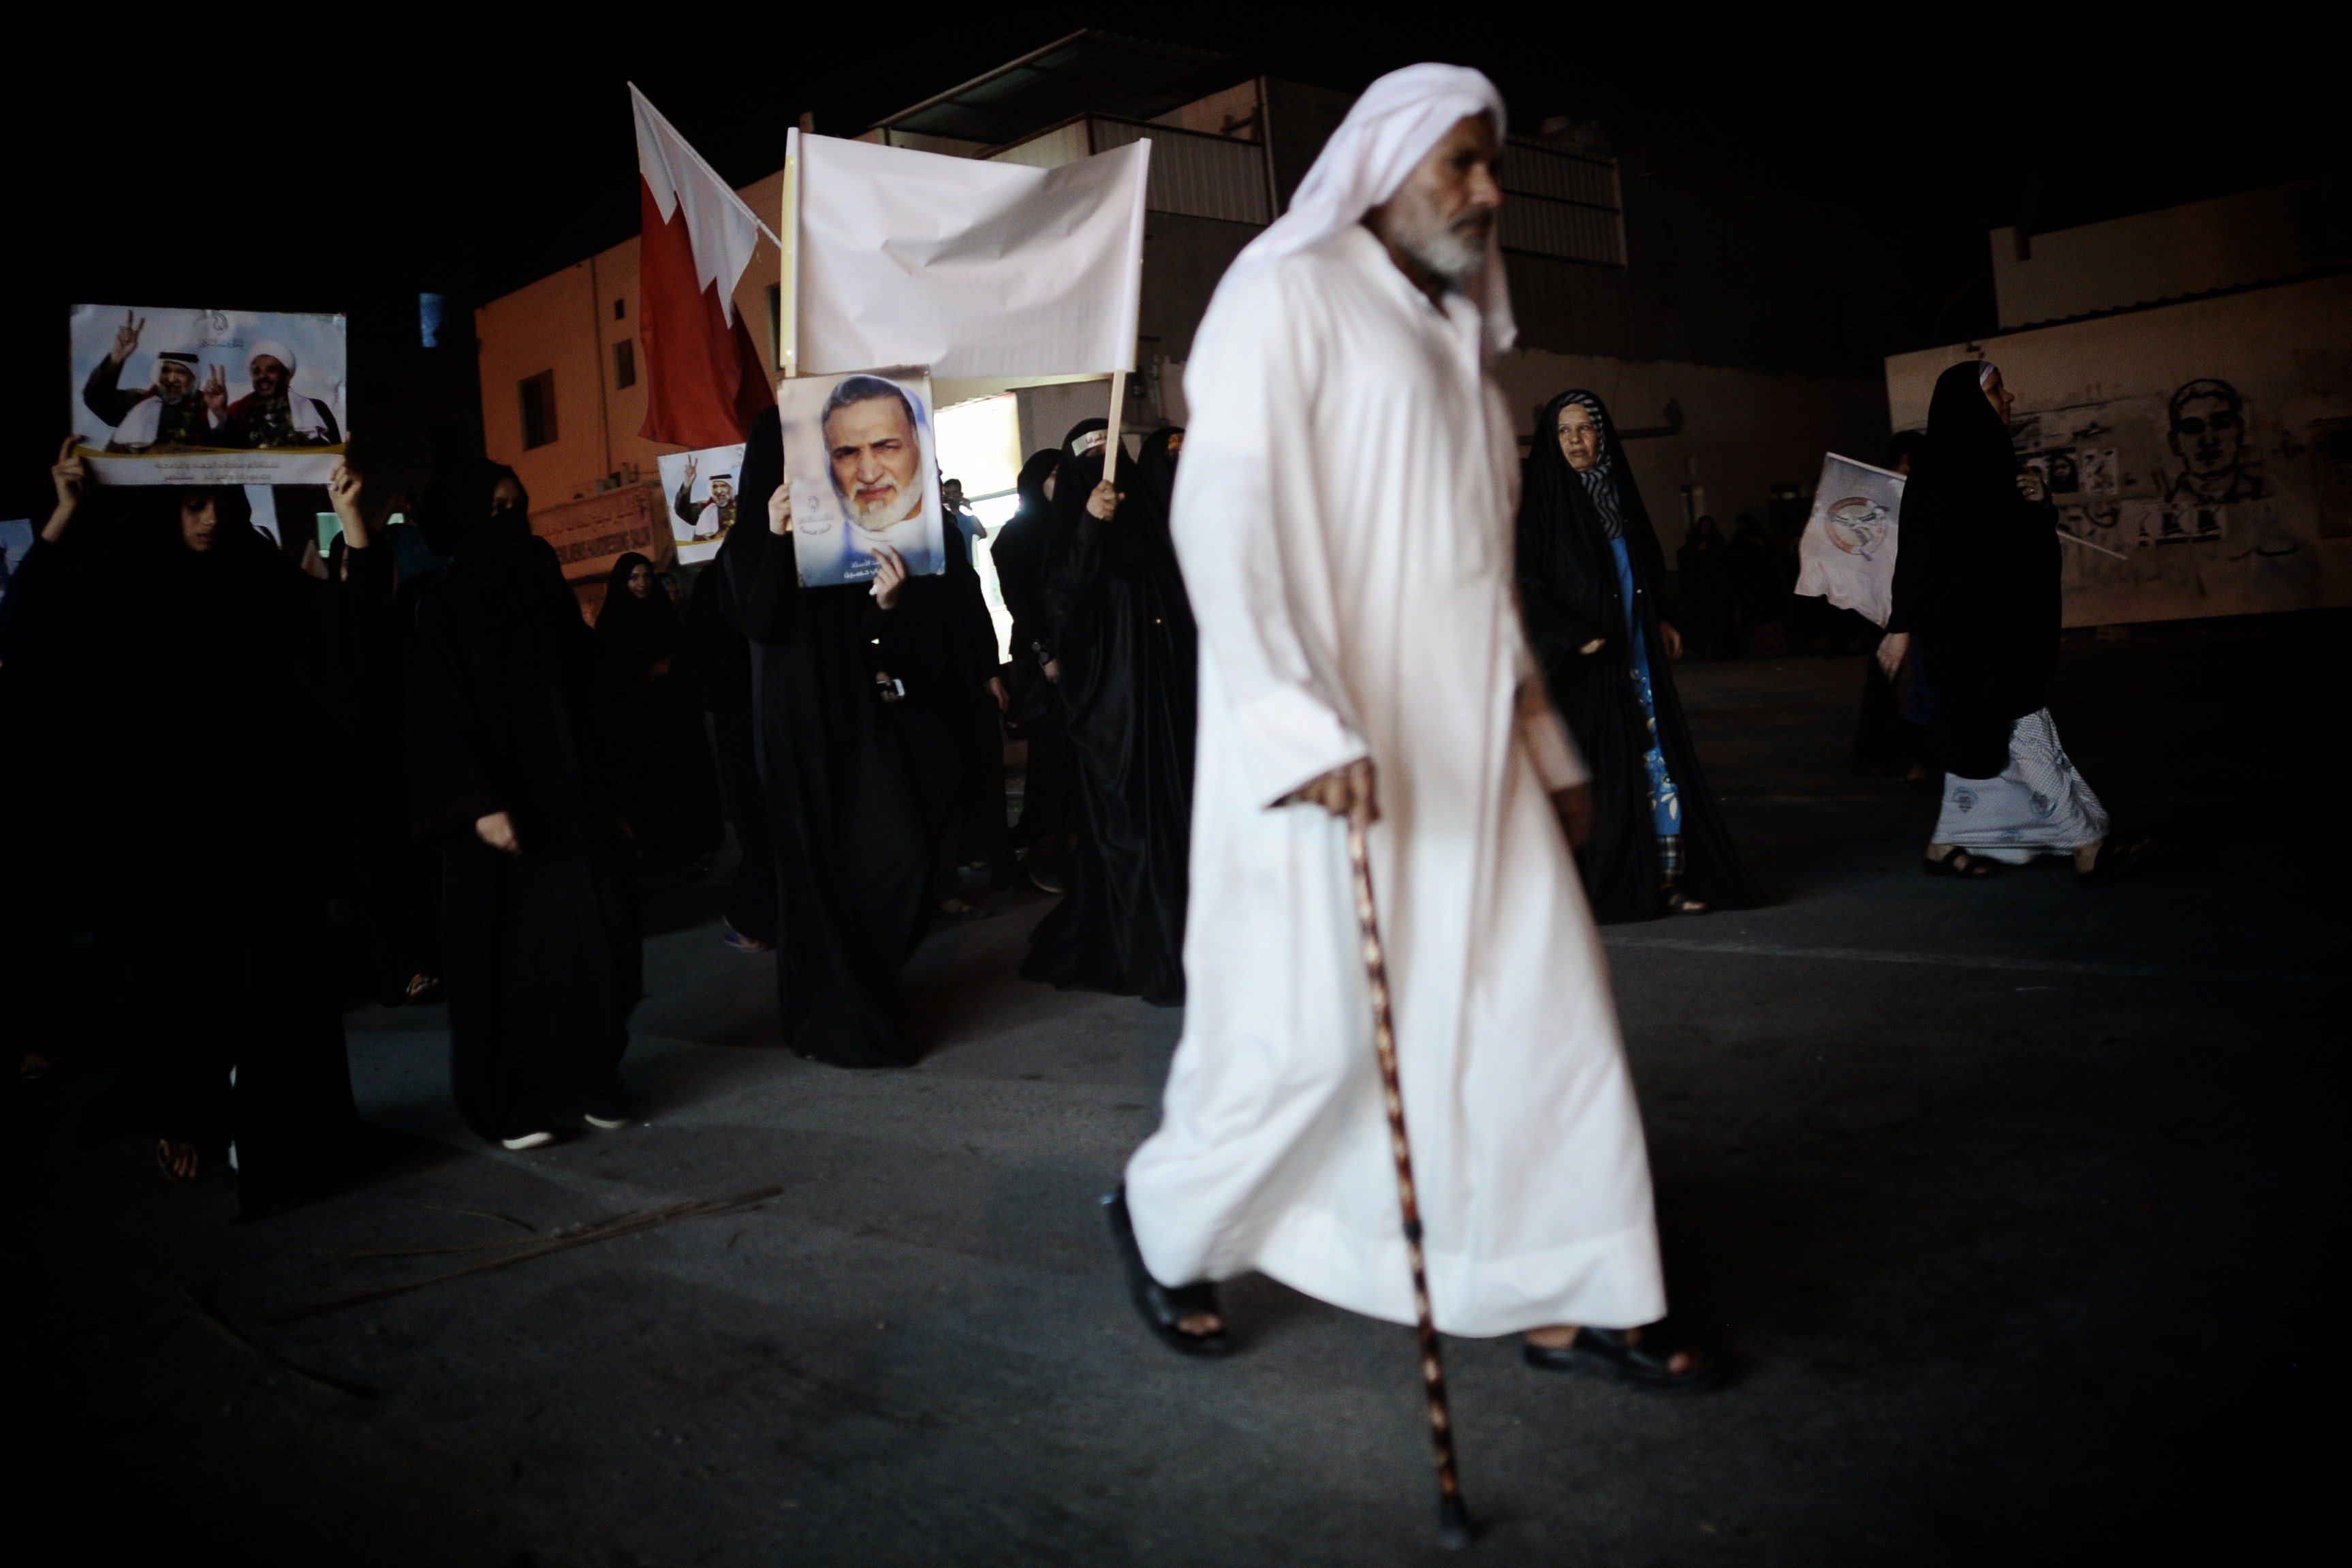 Bahraini Shi’a Muslims take part in an anti-government demonstration in the village of Sitra, South of Manama on 30 July (Photo: AFP /Mohammed Al-Shaikh)